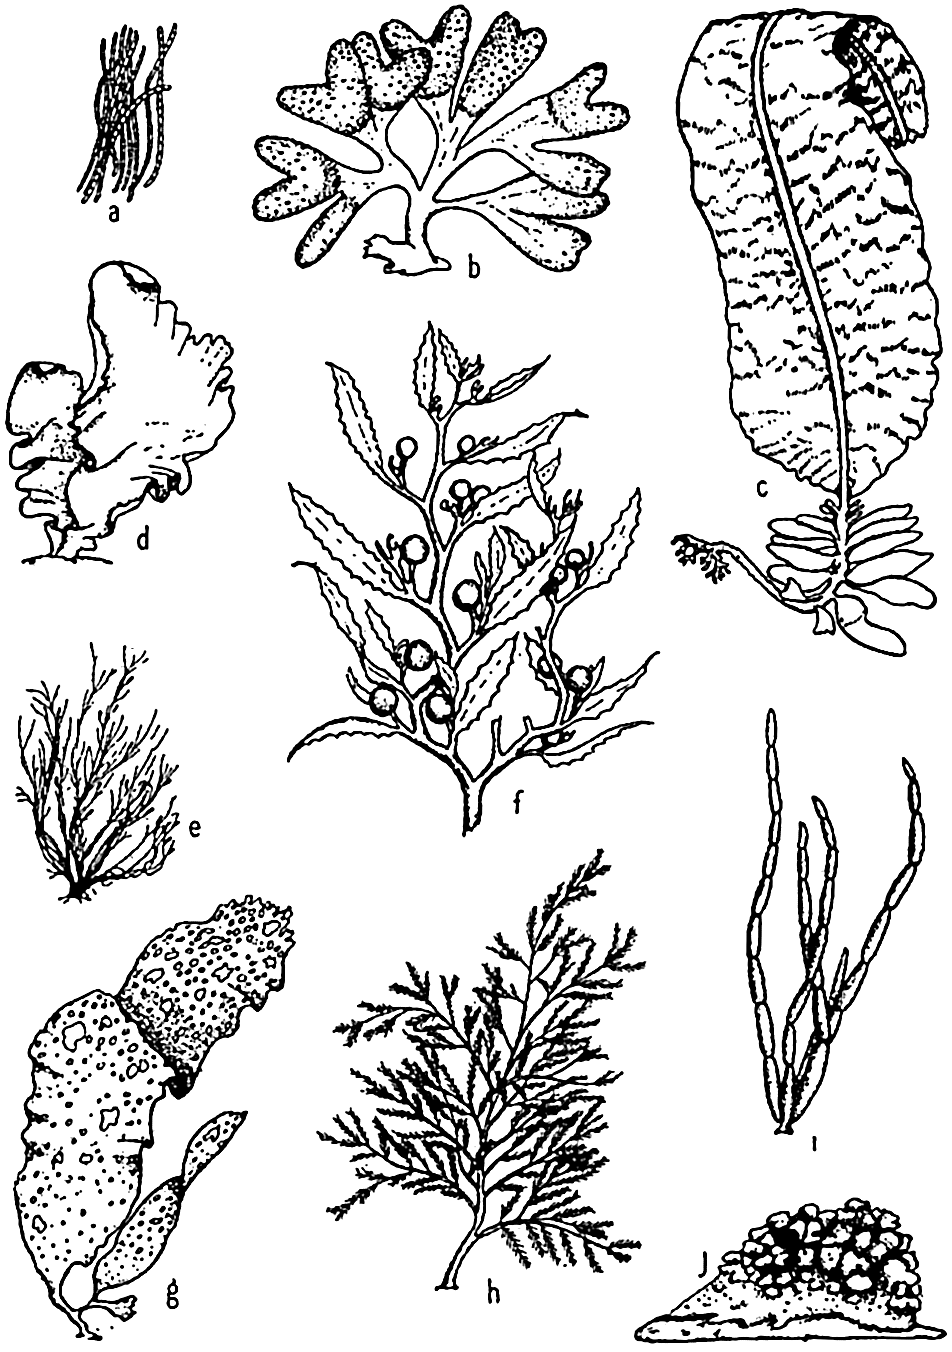 ocean plants coloring pages ocean plants drawing at getdrawingscom free for sketch plants coloring ocean pages 